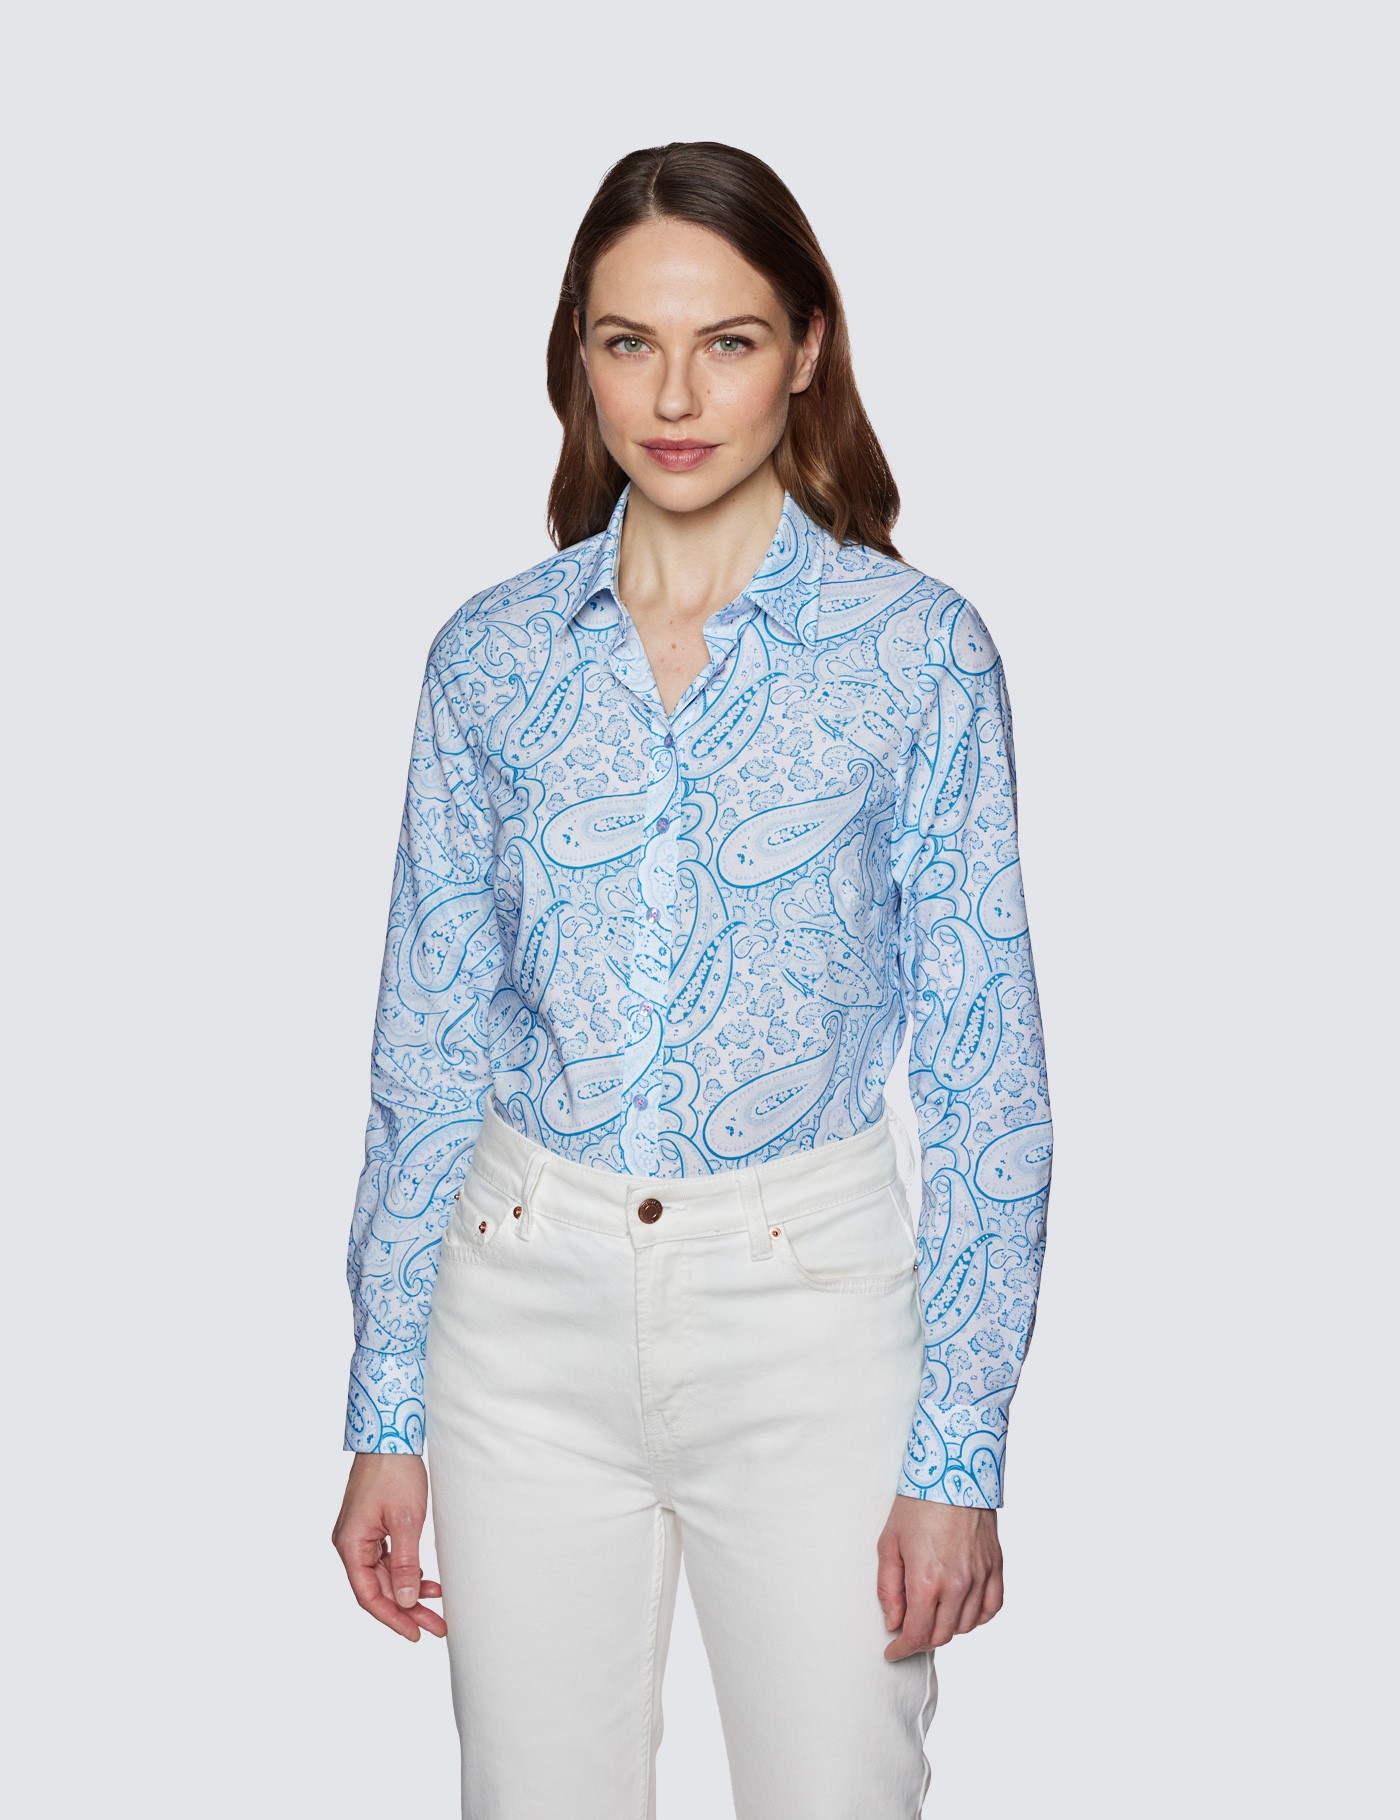 White & Pink Paisley Fitted Cotton Stretch Shirt